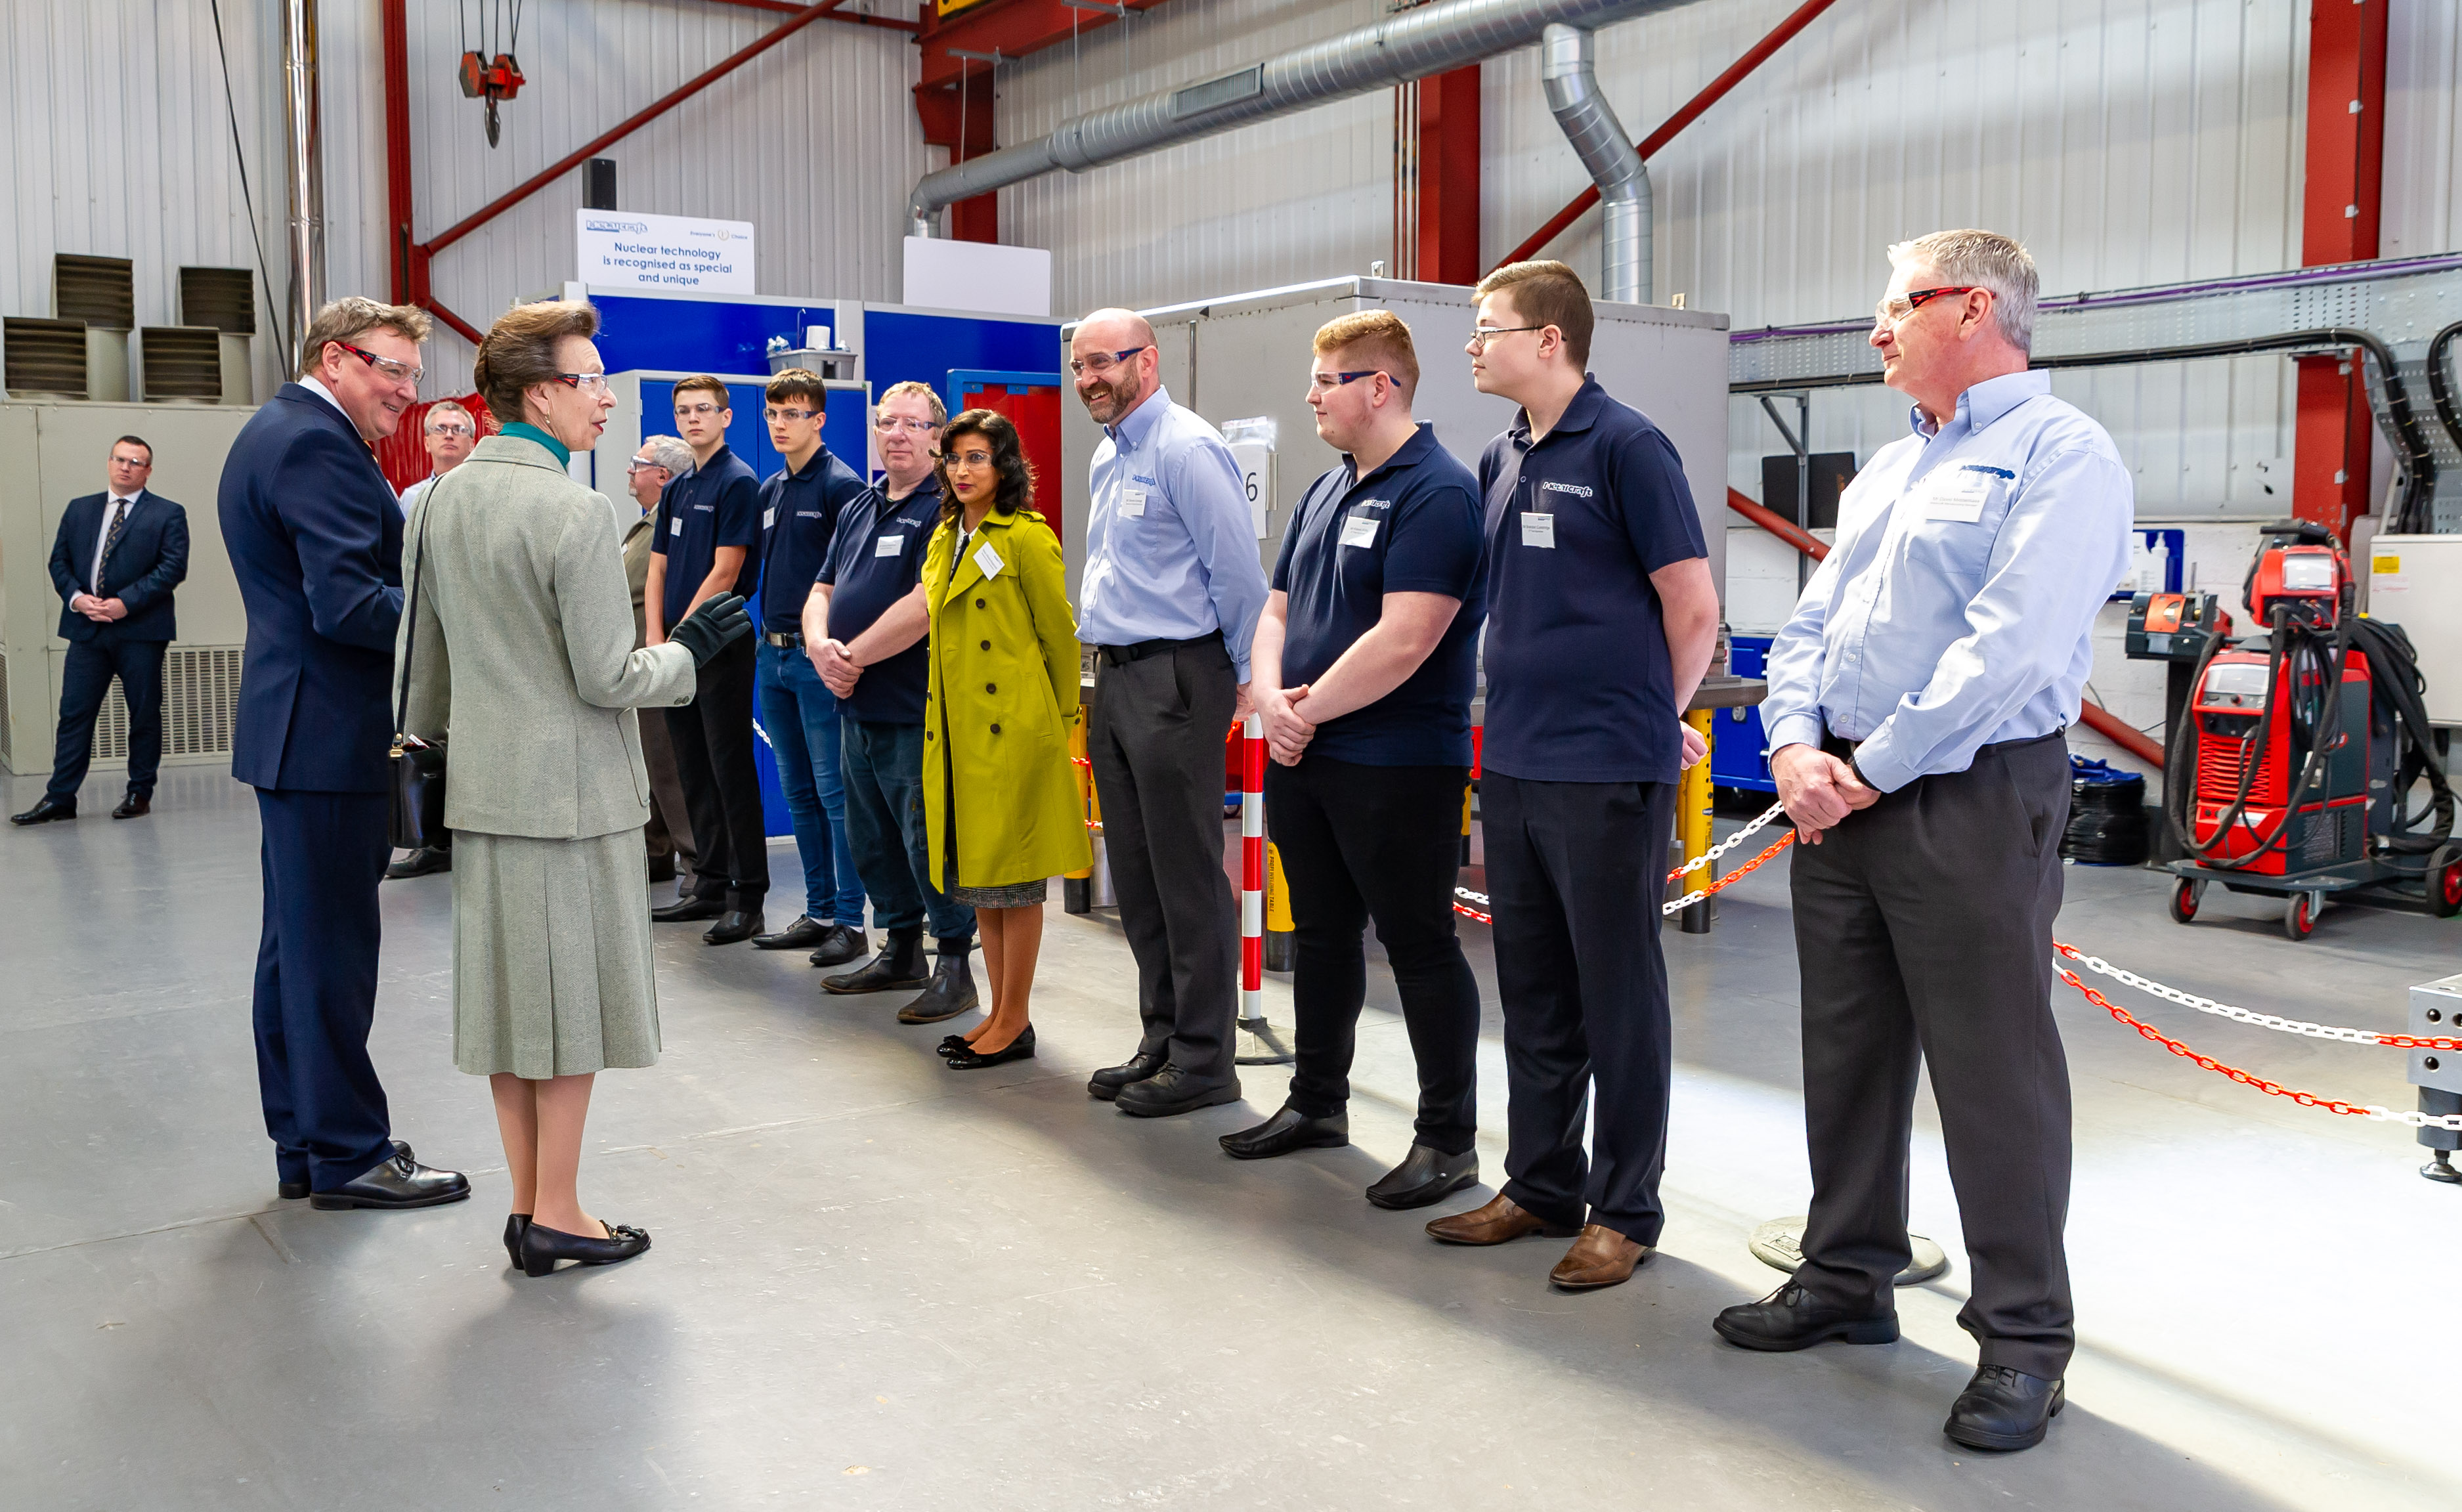 HRH the Princess Royal visits Stainless Metalcraft - March 2019